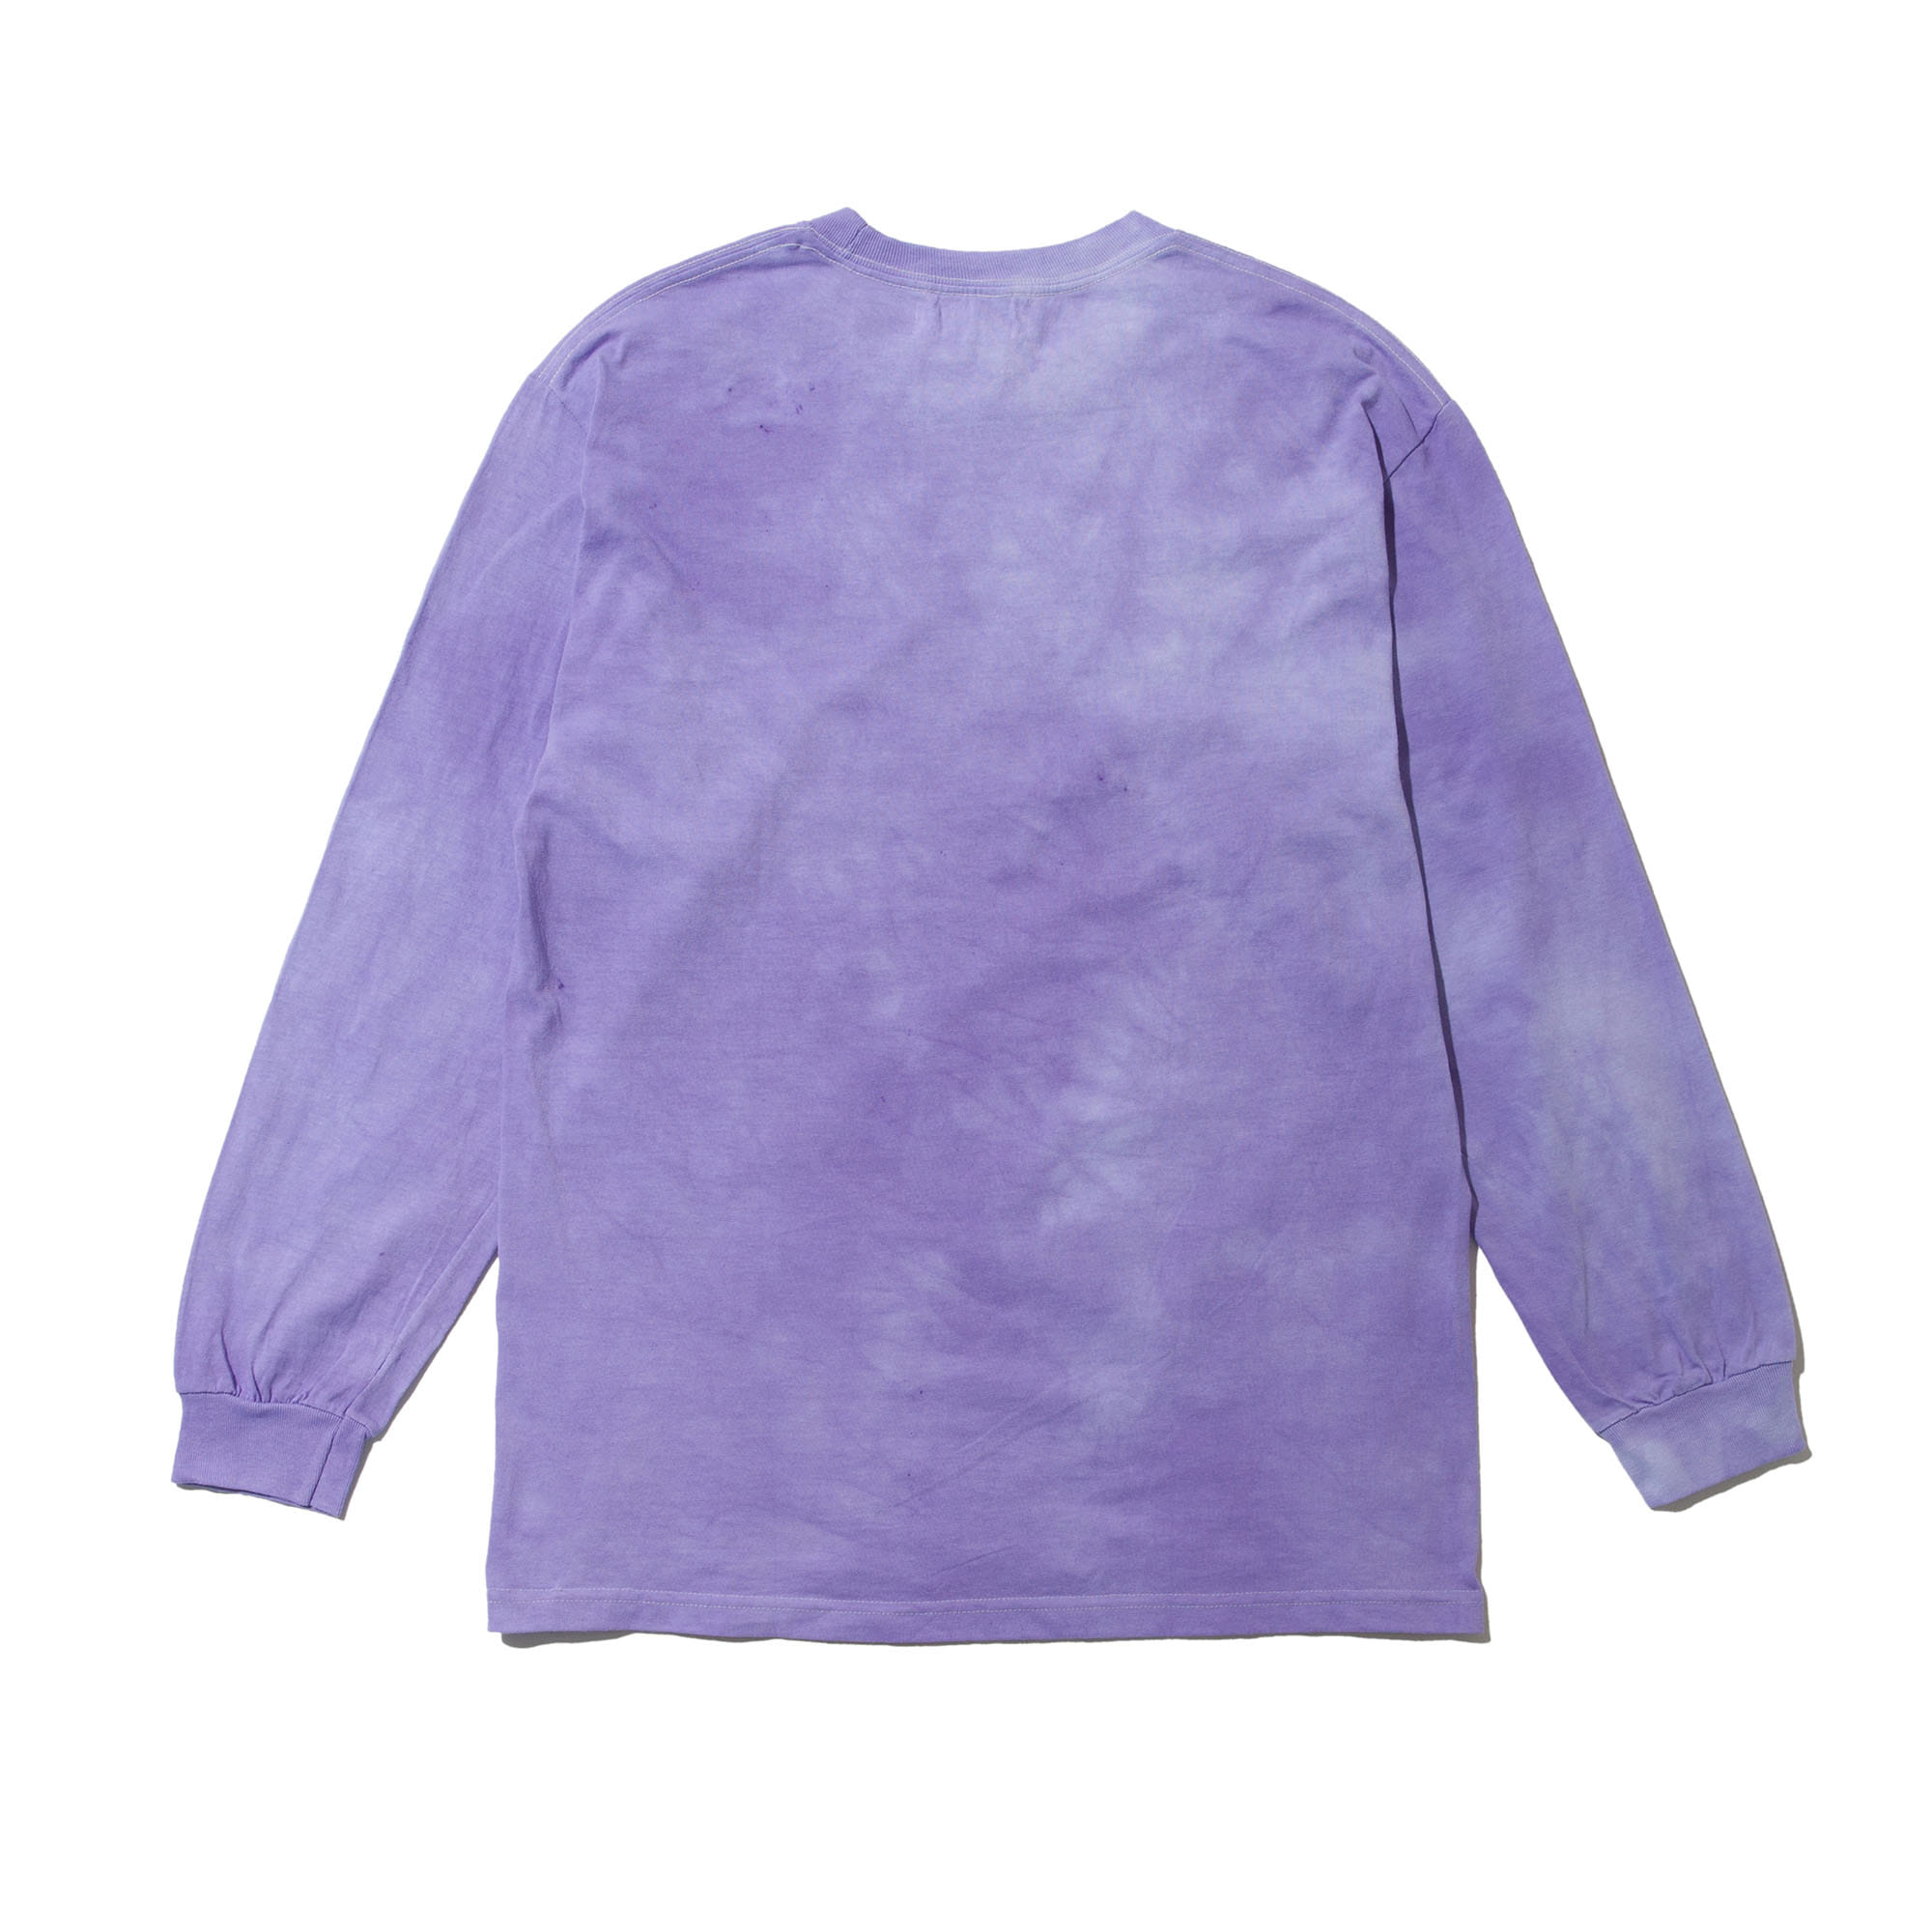 CL OVERDYED LS TEE - LAVENDER